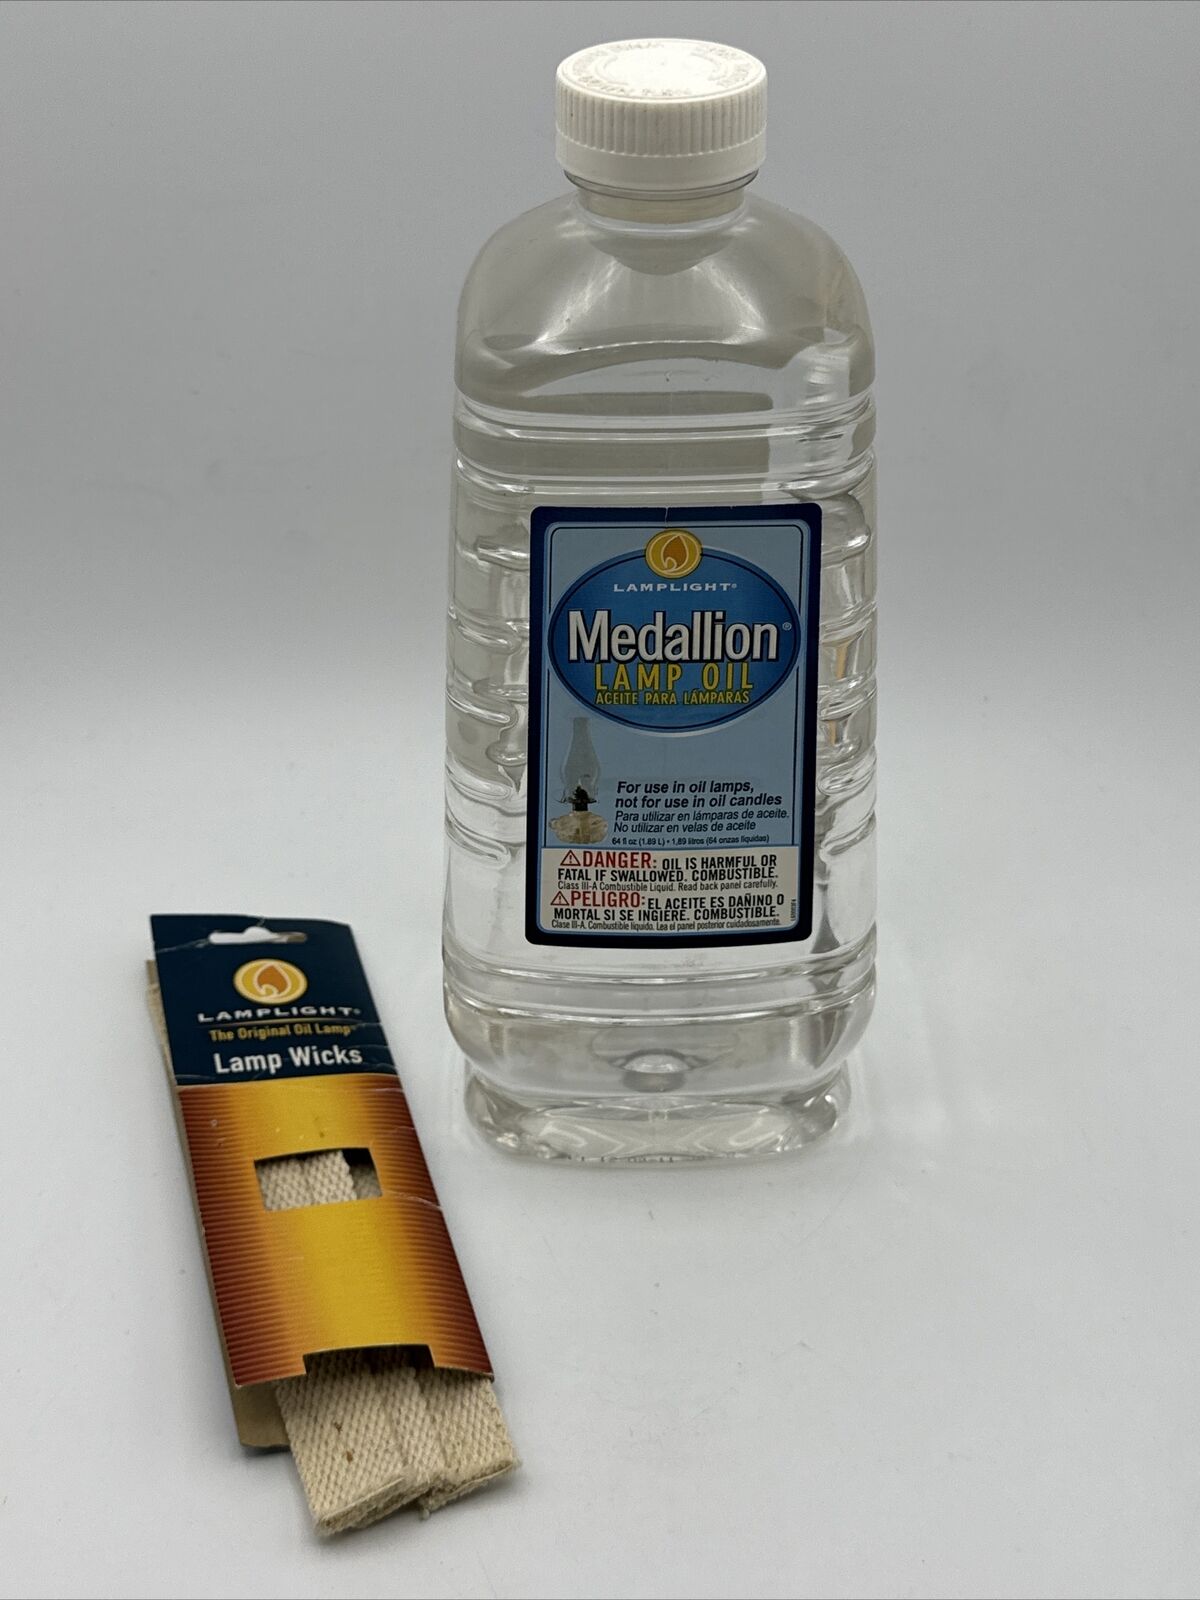 Medallion Lamp Oil Premium Quality Lamplight 64 oz - Pack Of 3 Wicks Included